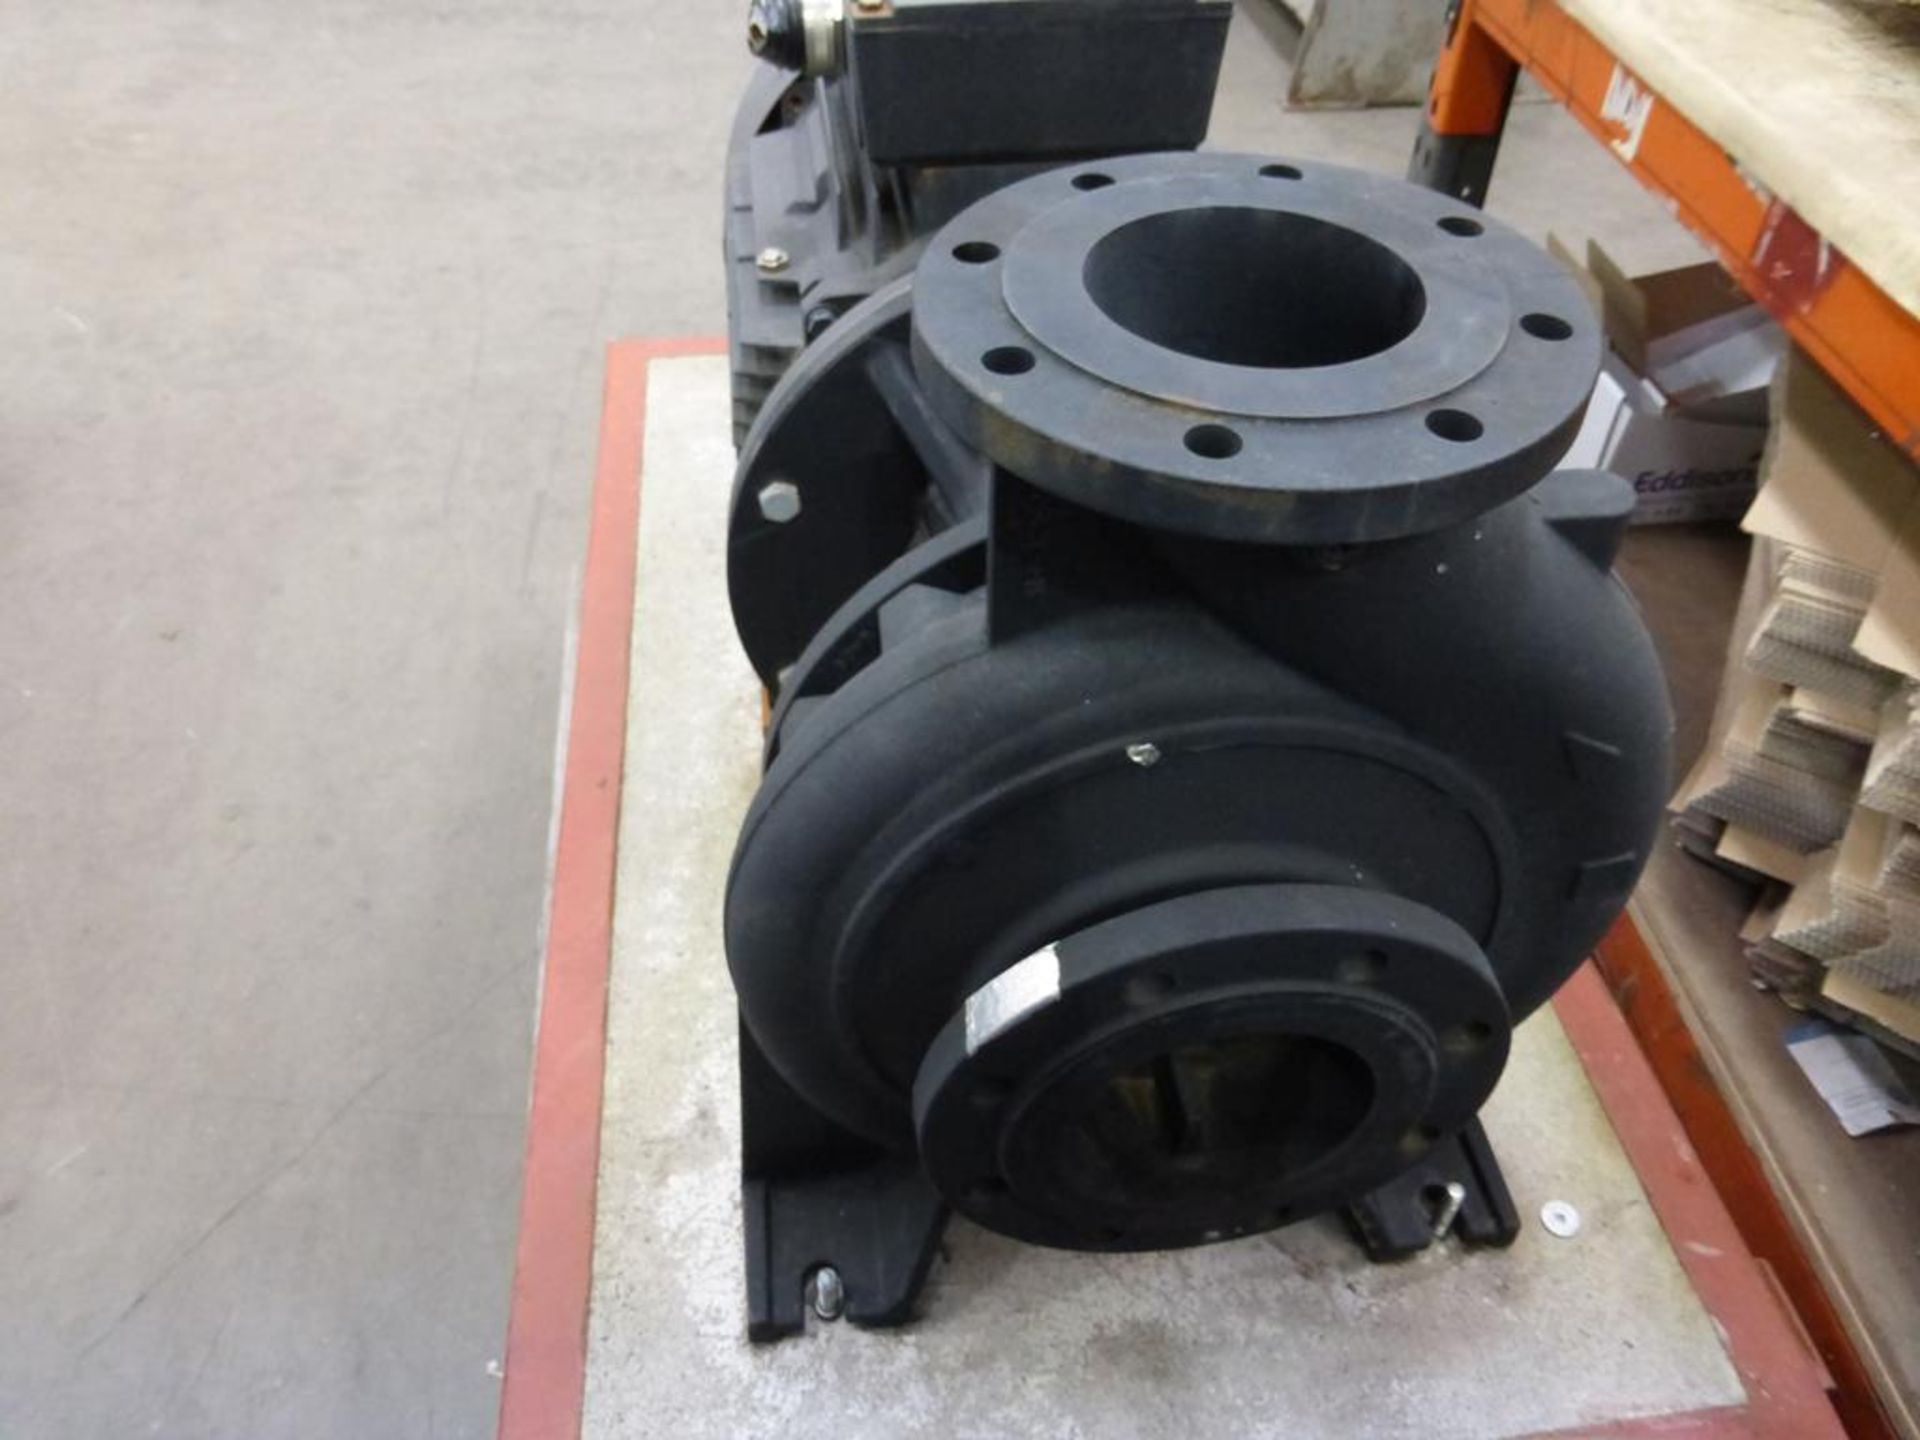 Grundfos X NB125-315/336 Afabaqe Water Pump - Image 2 of 3